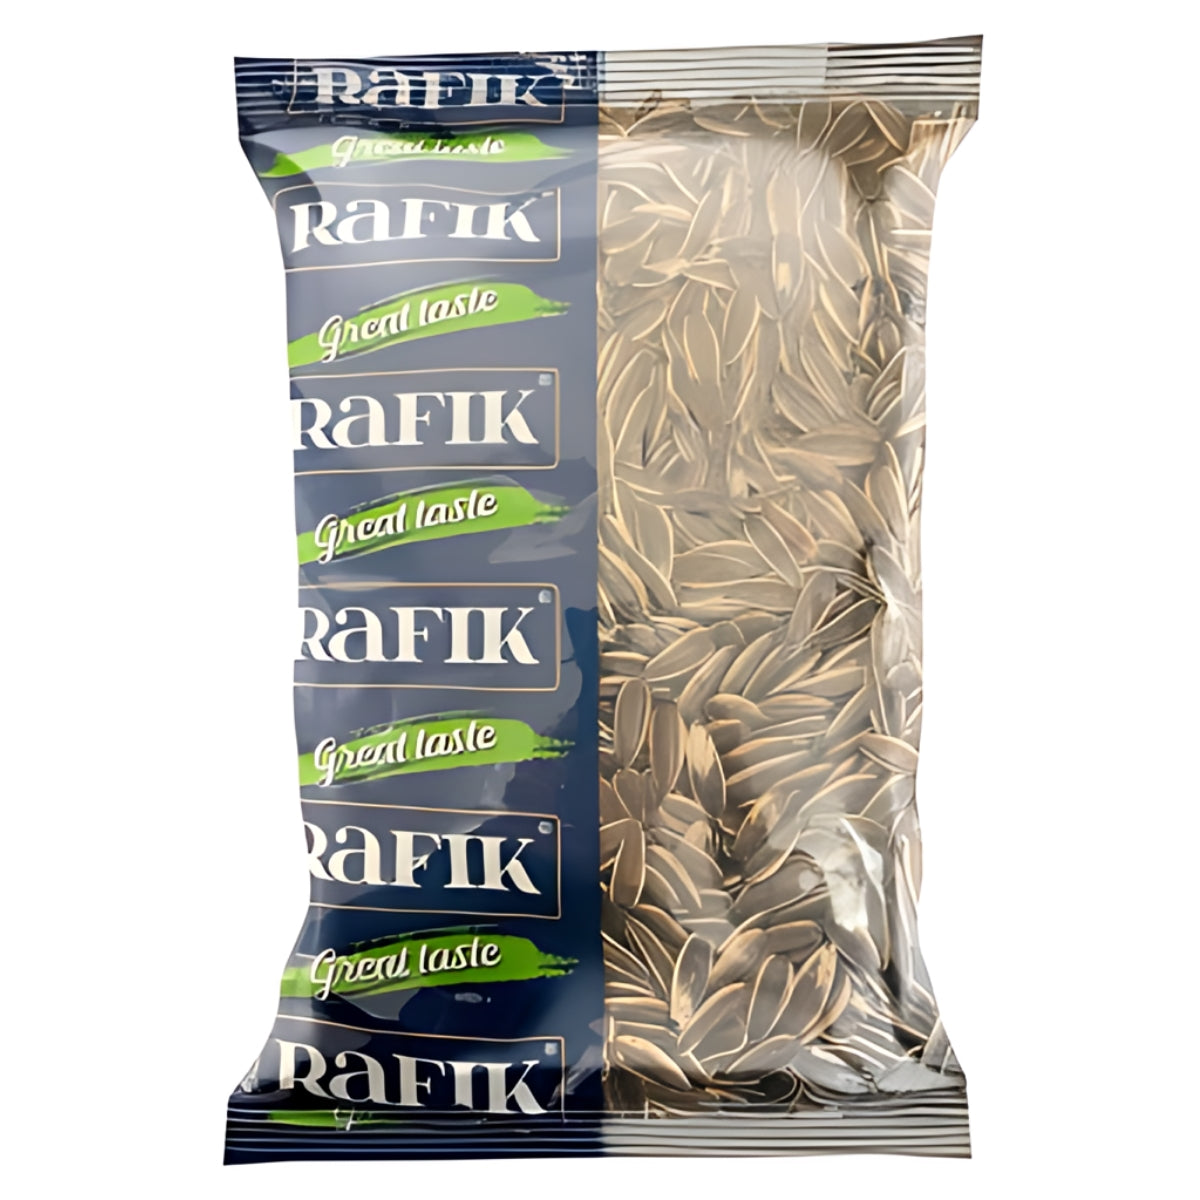 A sealed plastic bag of Rafik - Raw Dakota Sunflower Seeds - 800g, featuring a blue and green design on the packaging. Perfect as a nutritious snack, these seeds are packed with essential vitamins and minerals.